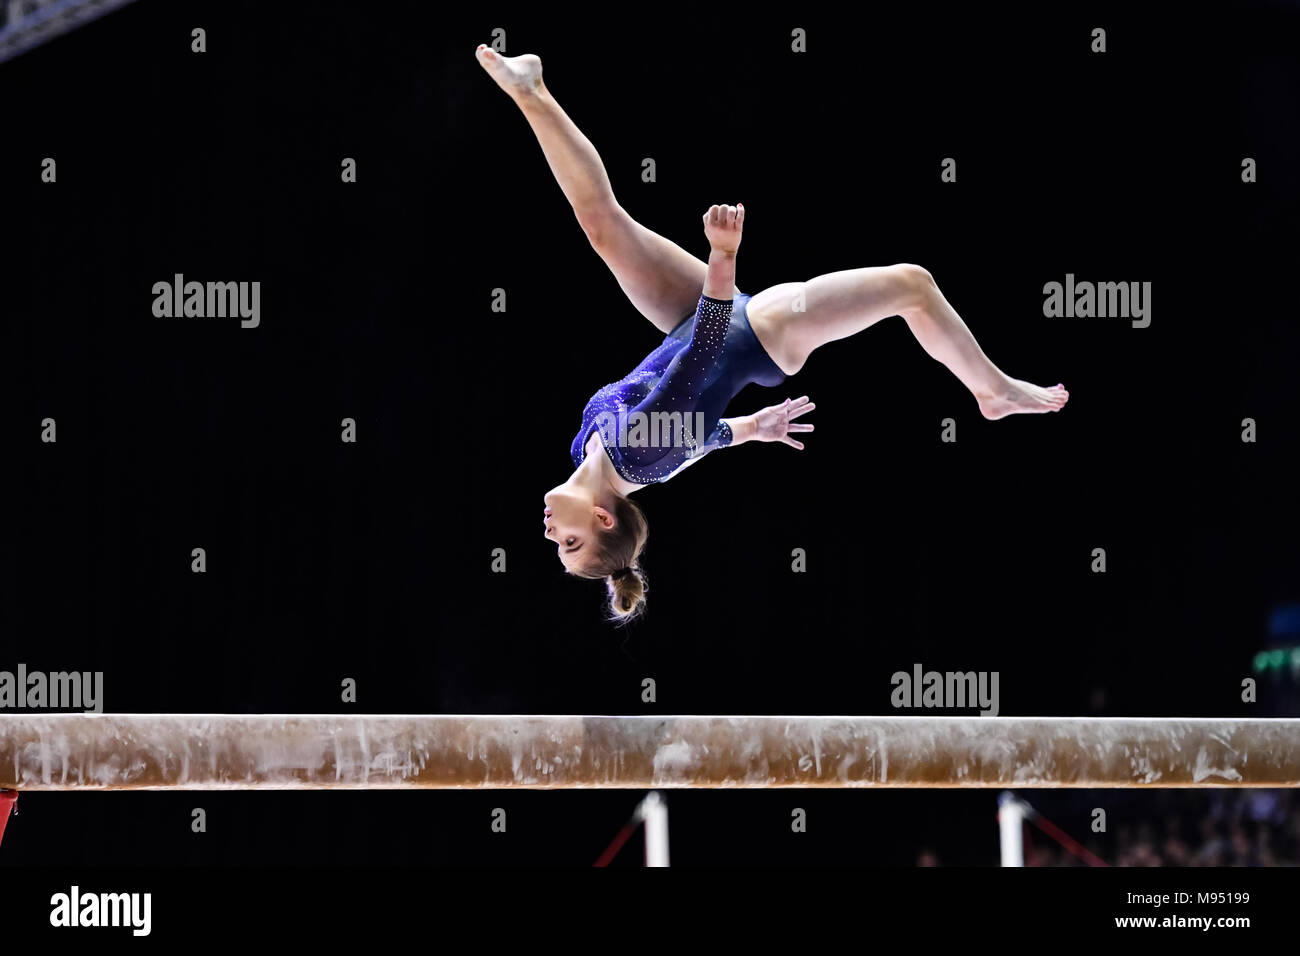 Birmingham, UK. 22nd march, 2018. Alice Kinsella (GBR) competes on the Balance Beam during the 2018 FIG Gymnastics World Cup at Arena Birmingham on Thursday, 22 March 2018. Birmingham England. Credit: Taka G Wu Credit: Taka Wu/Alamy Live News Stock Photo